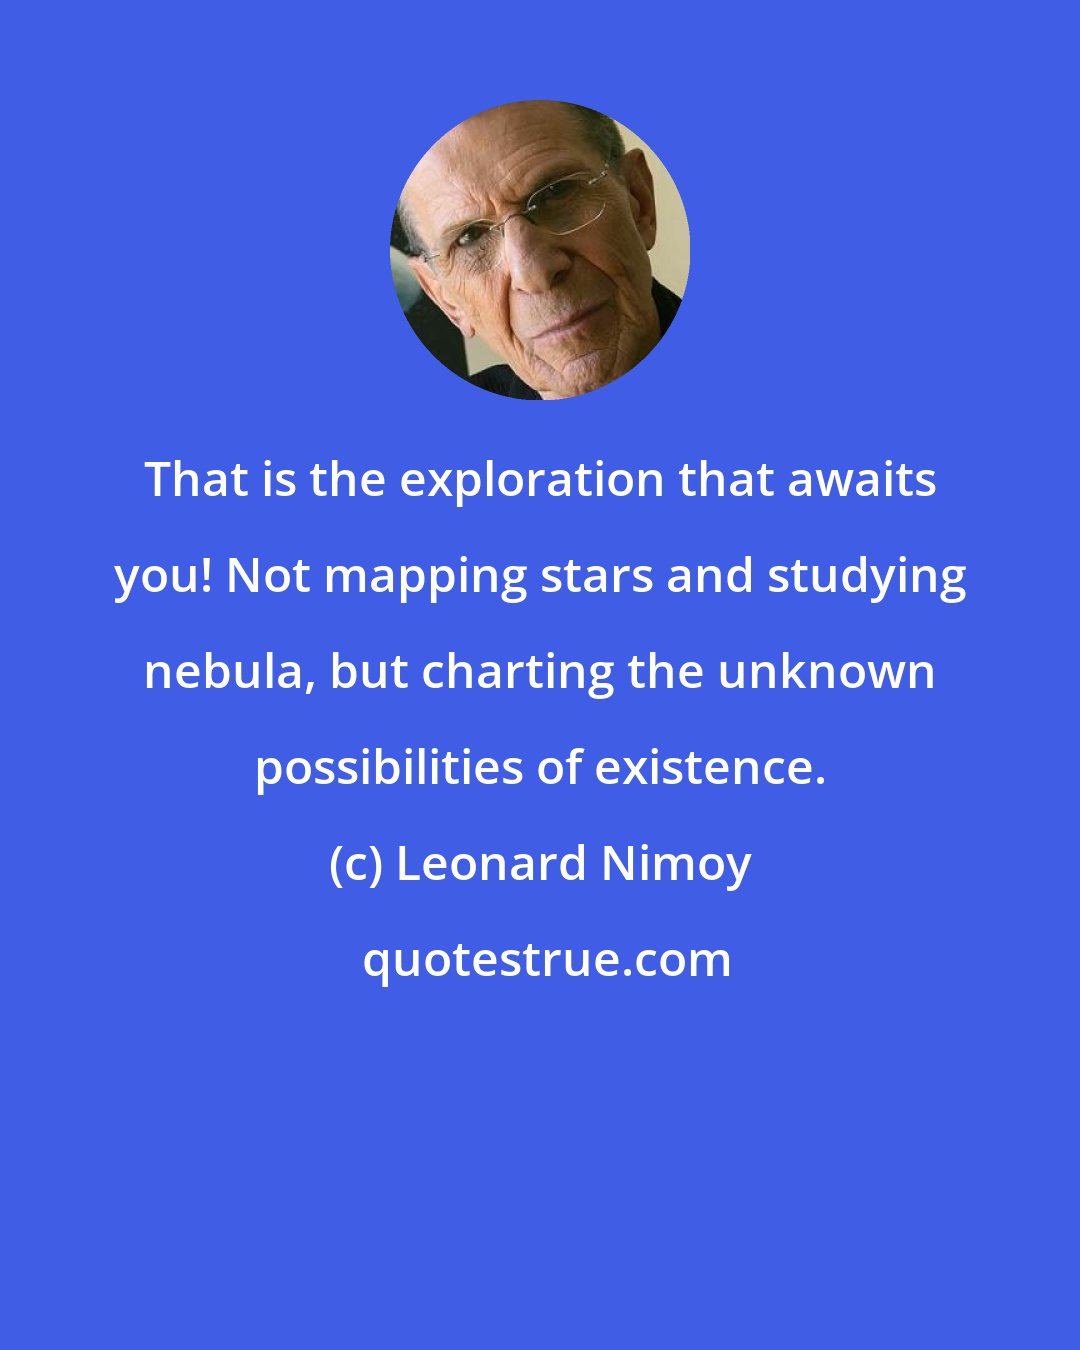 Leonard Nimoy: That is the exploration that awaits you! Not mapping stars and studying nebula, but charting the unknown possibilities of existence.